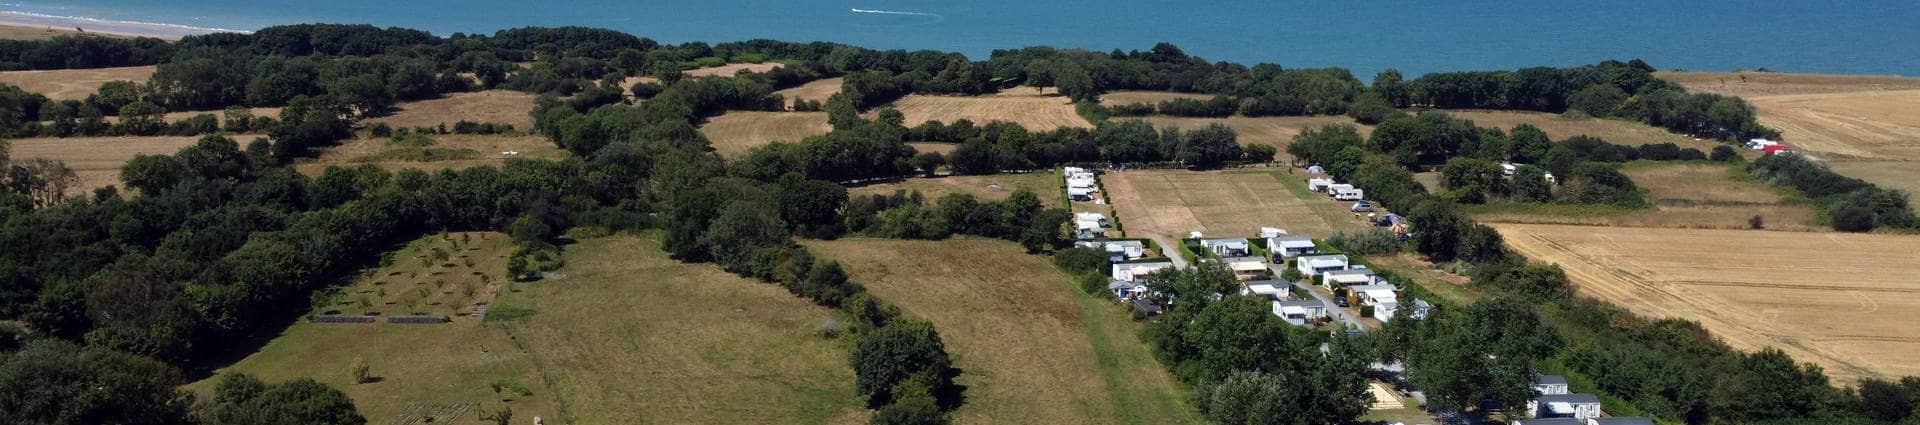 Mobile homes and pitches to rent in Calvados for a comfortable camping holiday in Normandy